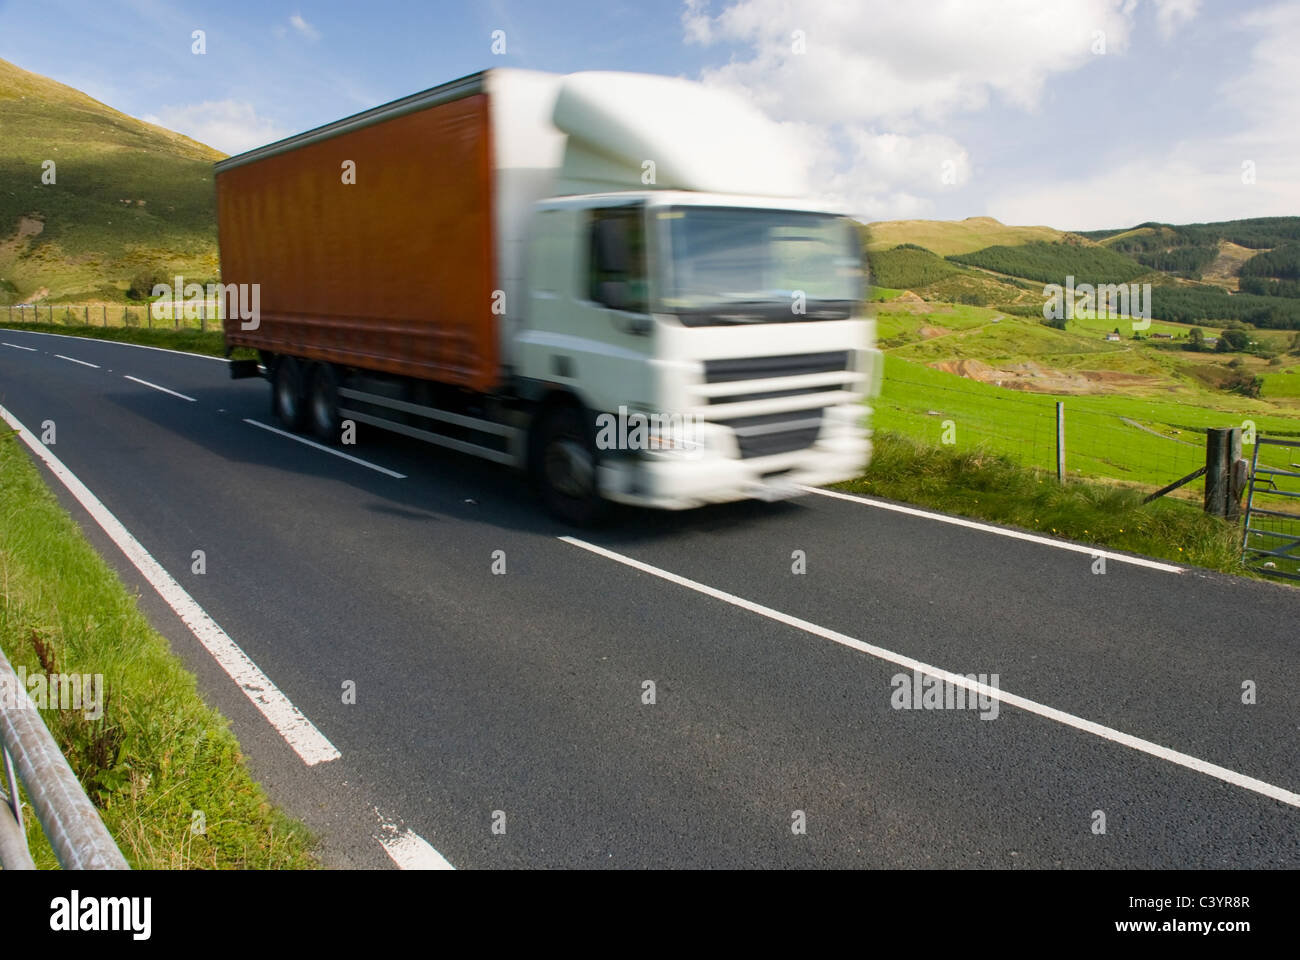 Truck on the mountain road, Wales, UK Stock Photo